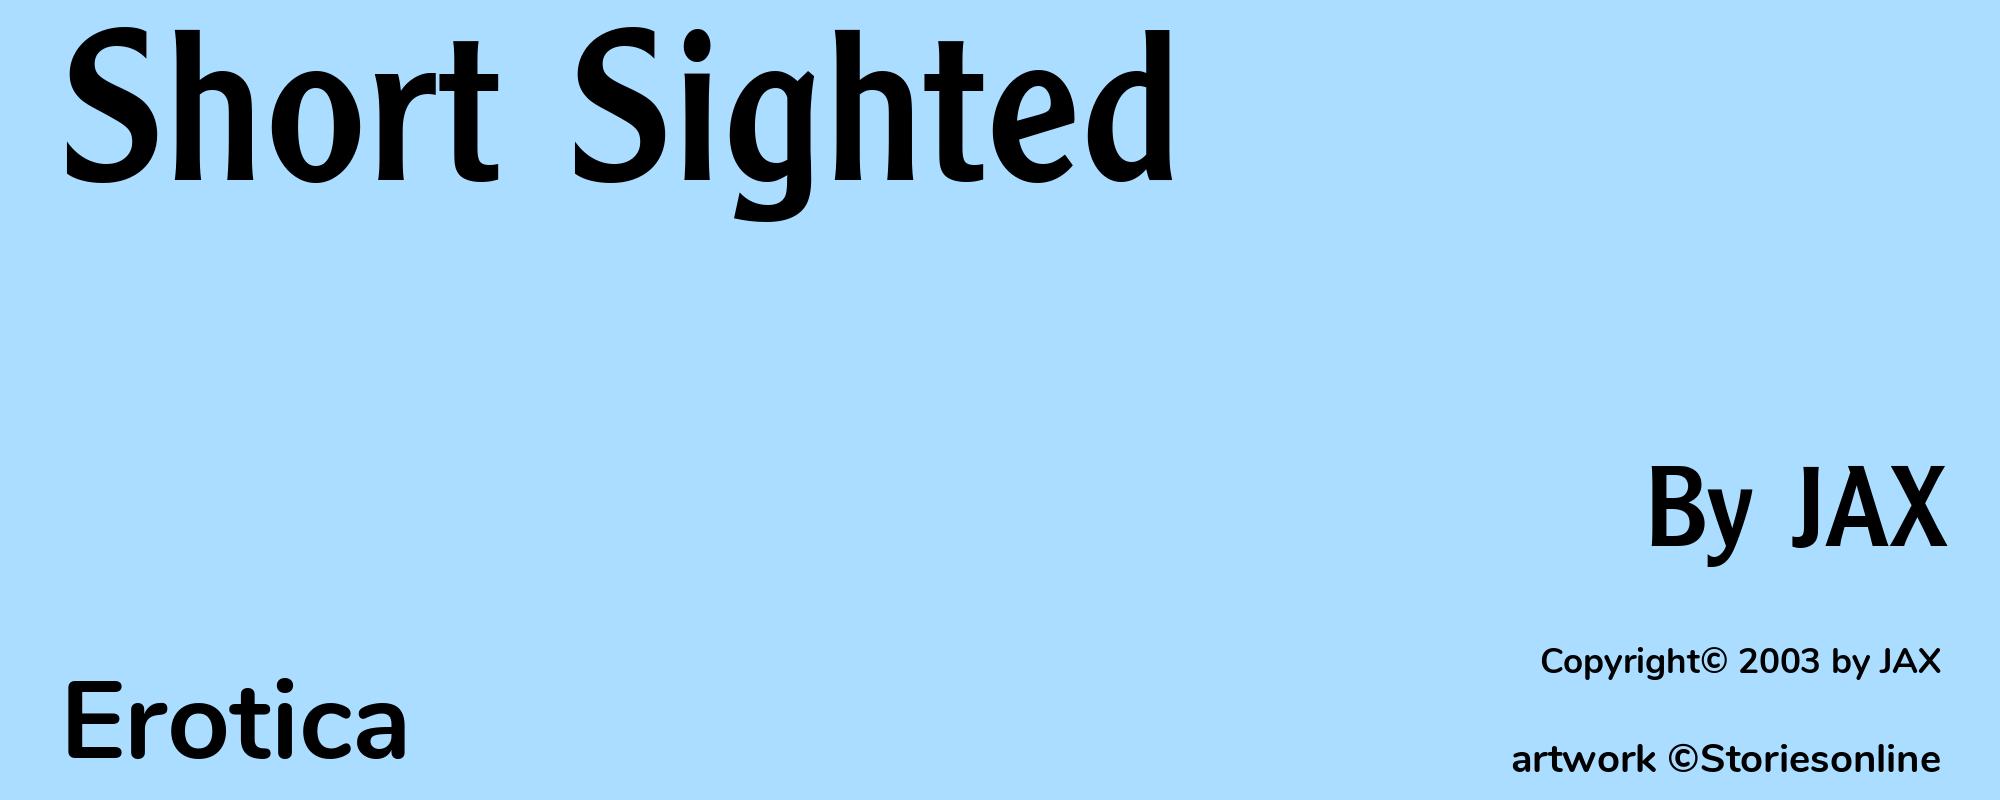 Short Sighted - Cover